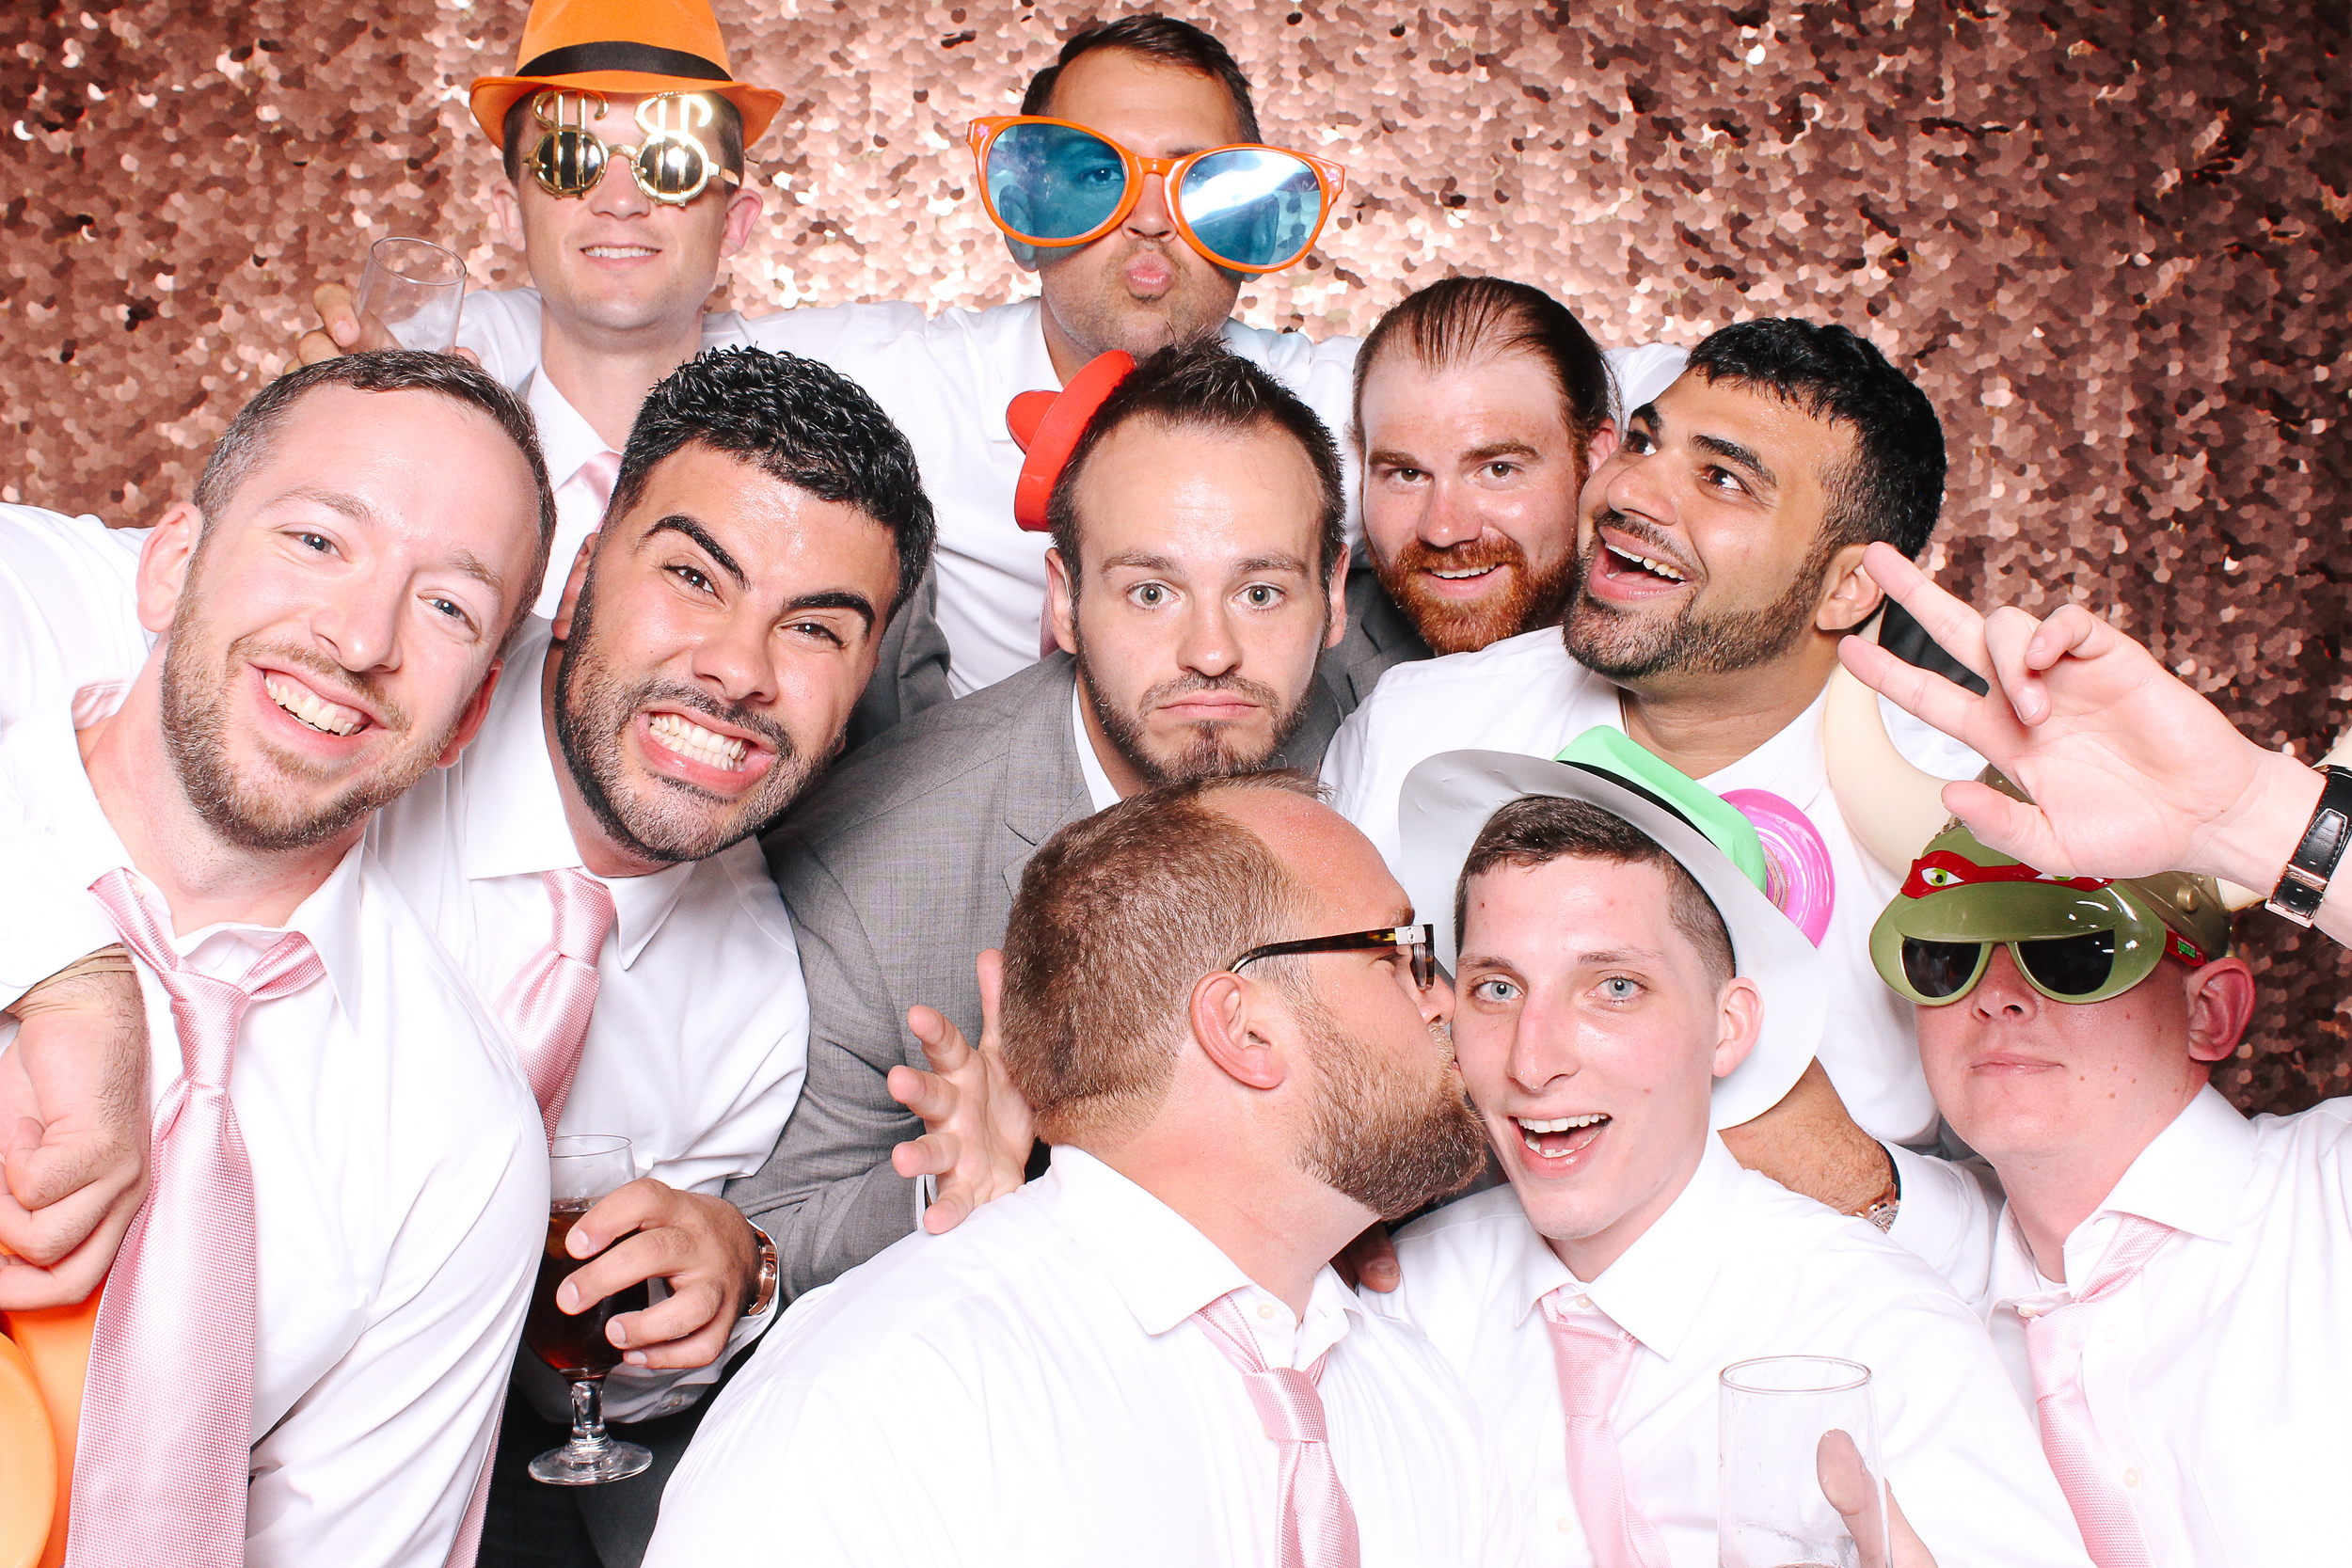 00075-Cleveland Wedding Photo Booth Open Air at Windows on the River-20150926.jpg